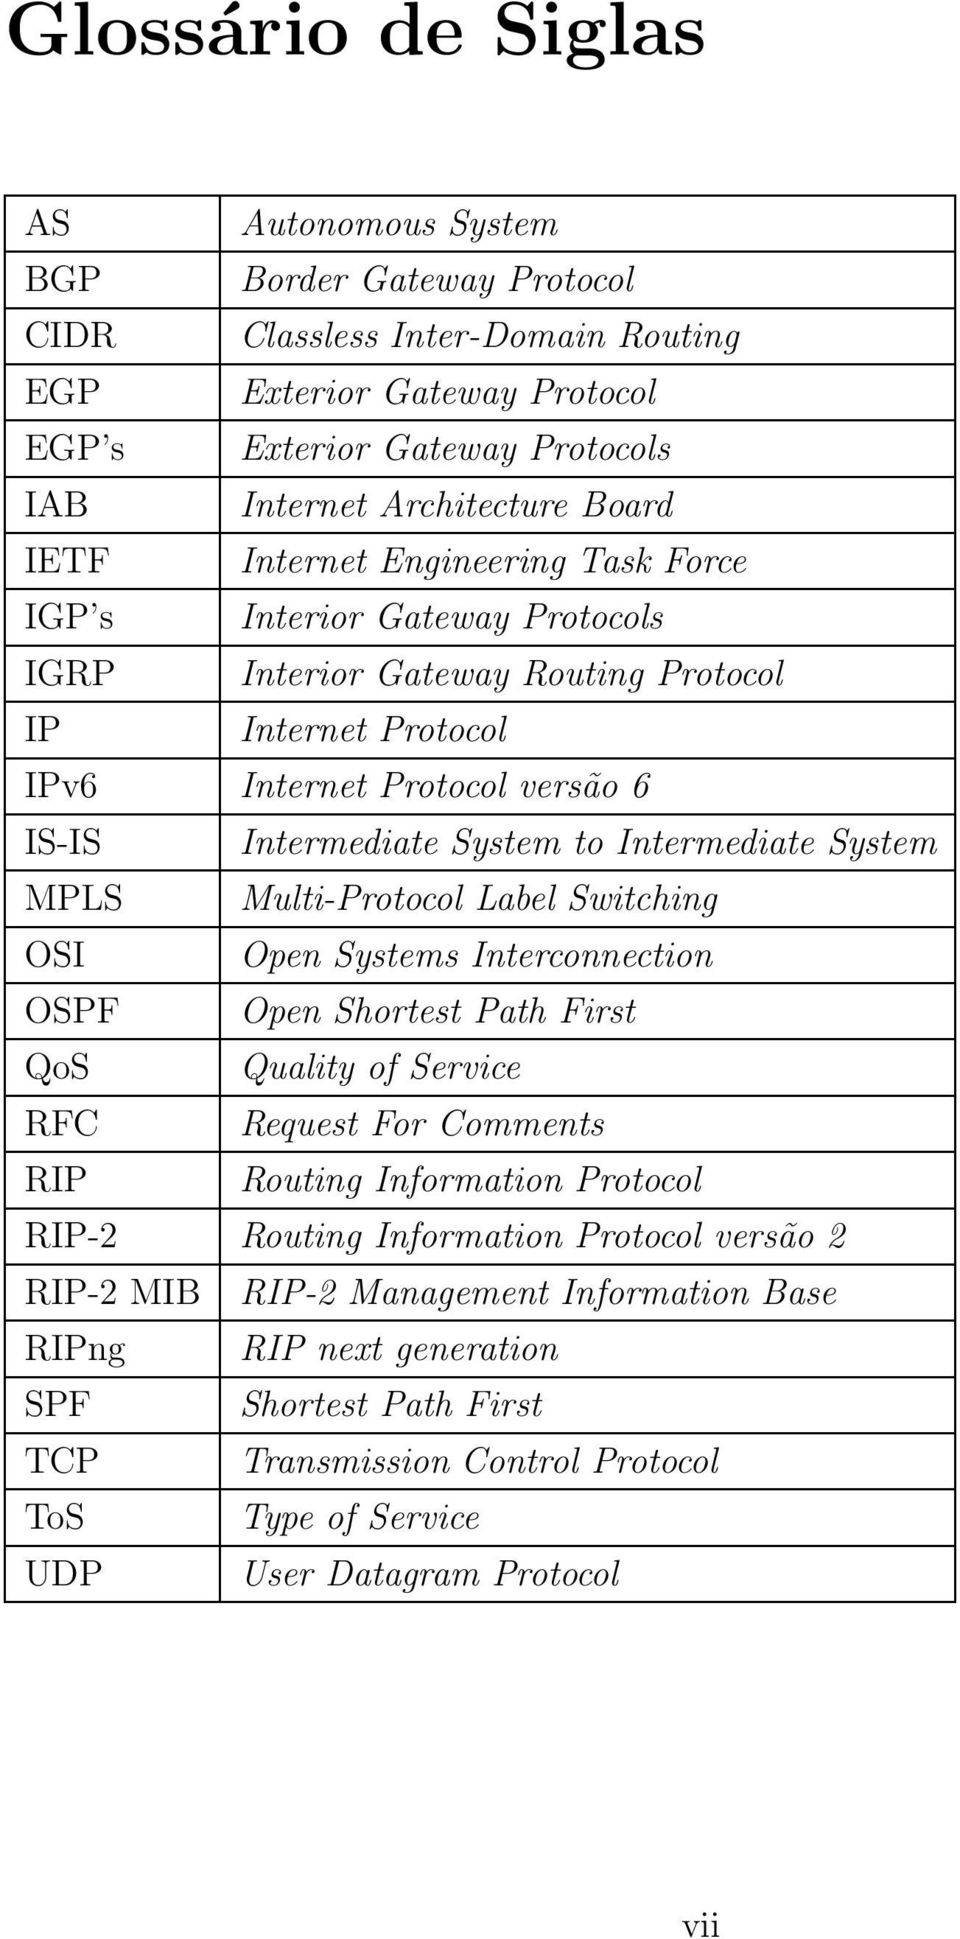 Intermediate System MPLS Multi-Protocol Label Switching OSI Open Systems Interconnection OSPF Open Shortest Path First QoS Quality of Service RFC Request For Comments RIP Routing Information Protocol